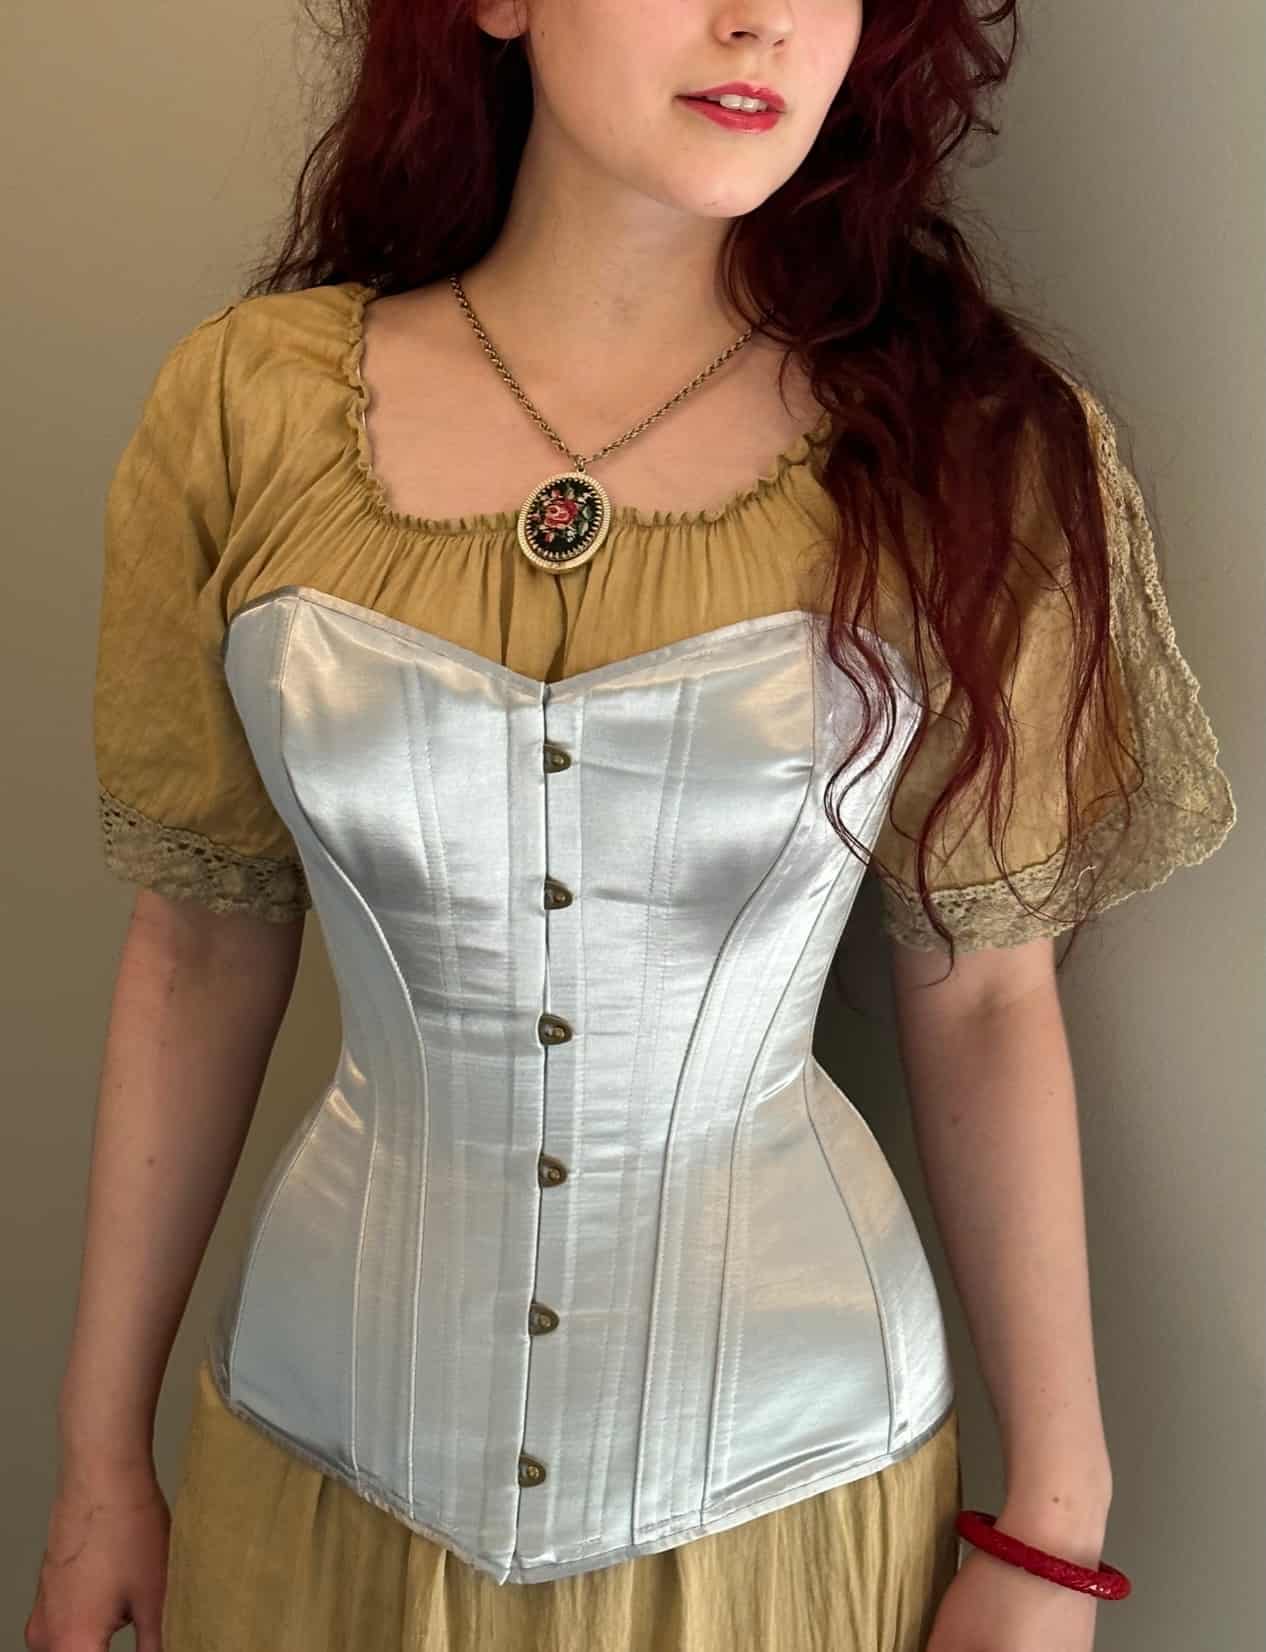 High Quality Corsets With Same Day Shipping from Vancouver